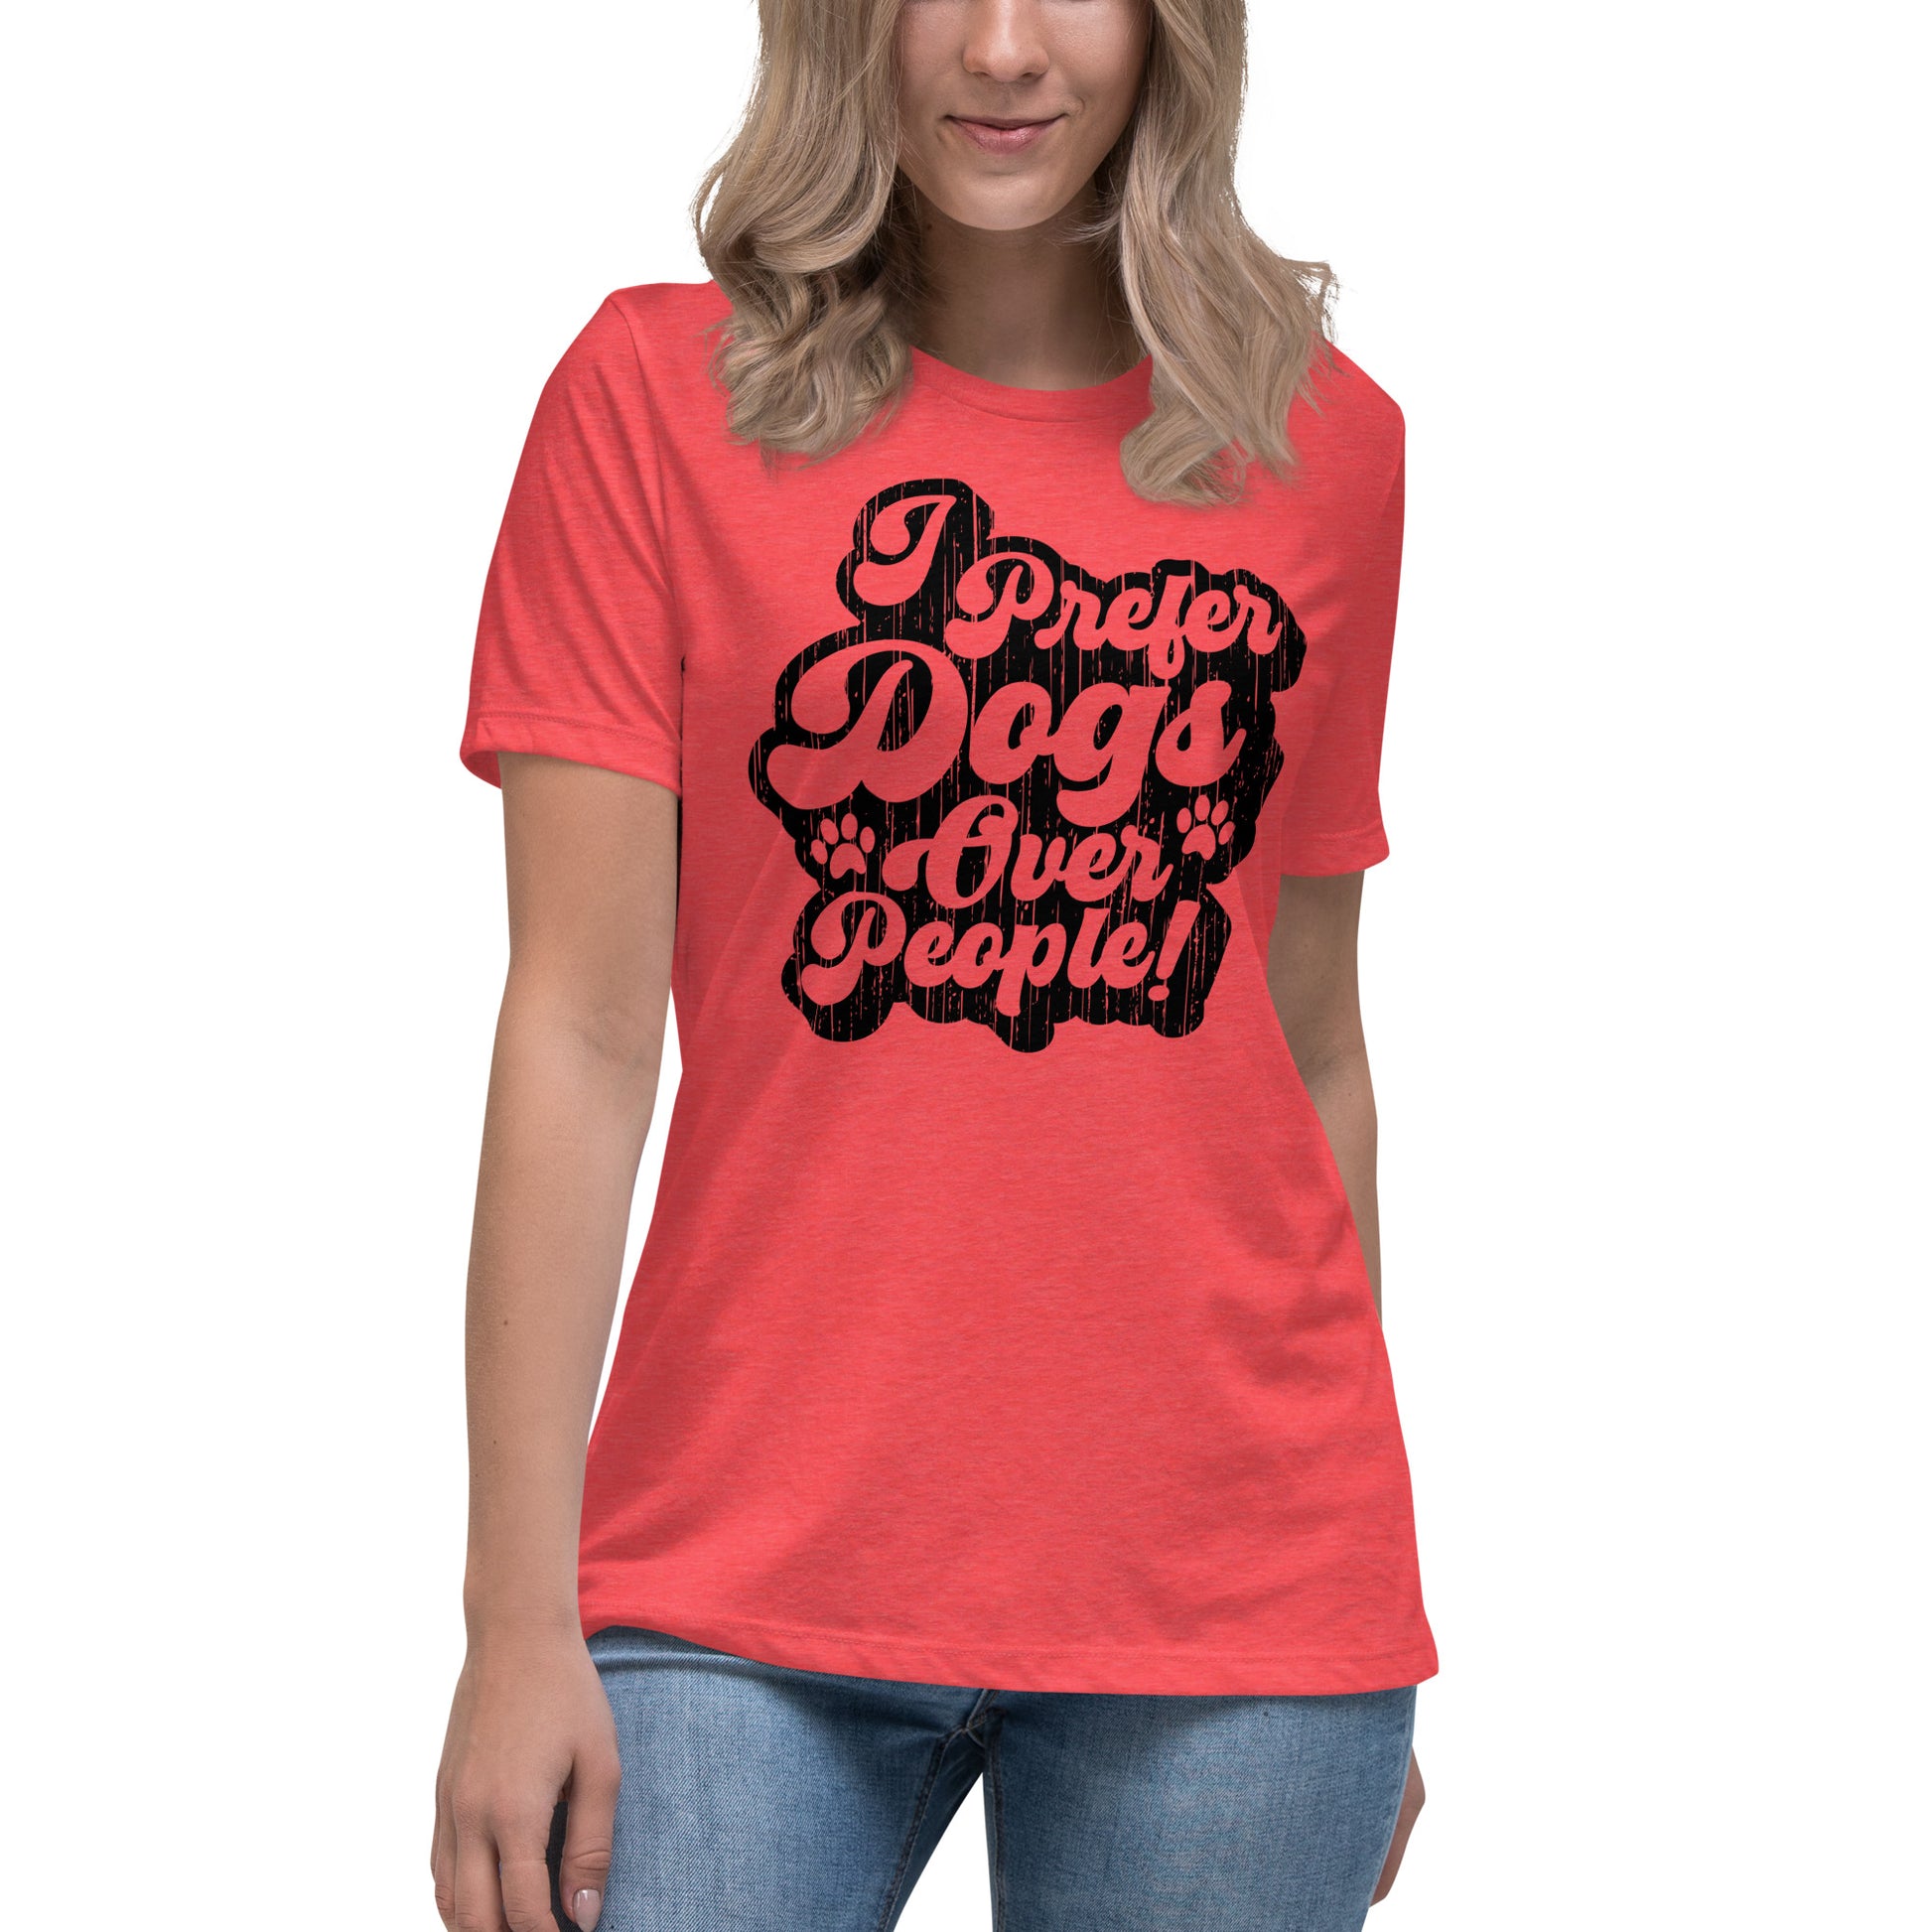 I prefer dogs over people women’s relaxed fit t-shirts by Dog Artistry heather red color